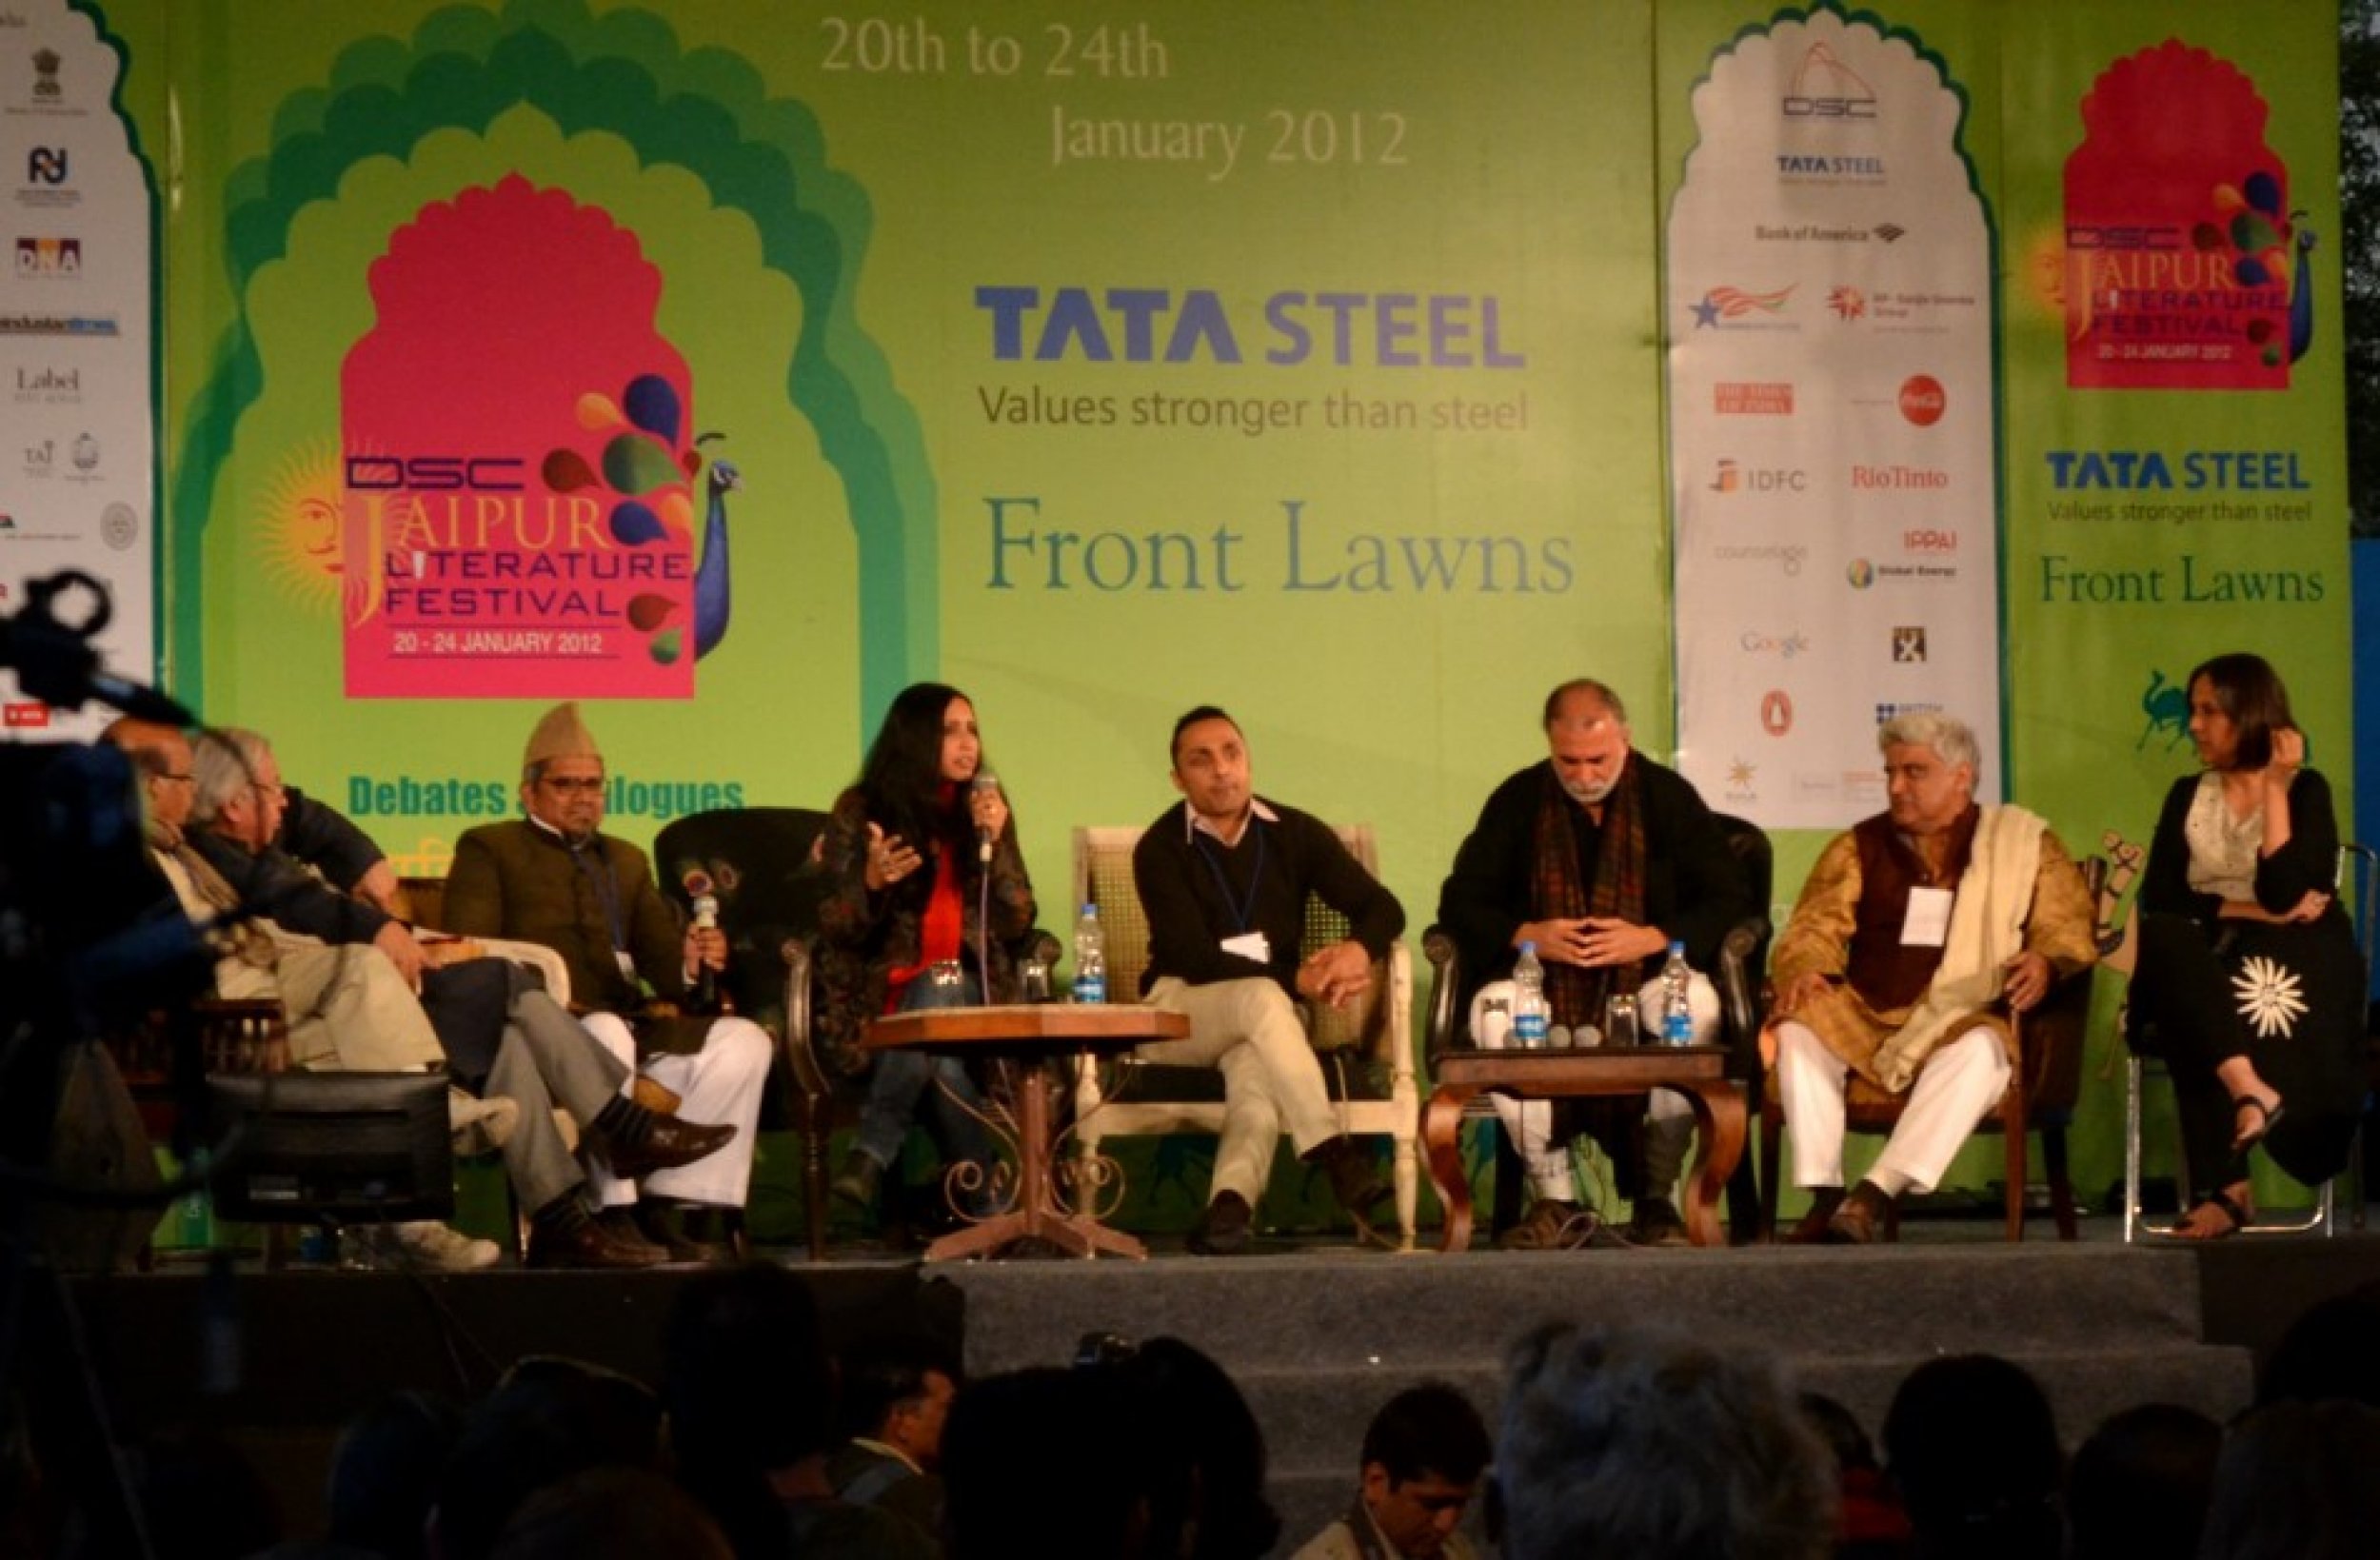 Jaipur Literature Festival 2012. The five-day-long festival aims to showcase the best of Indian, South Asian and international writing in one of the world039s fastest-growing publishing markets.